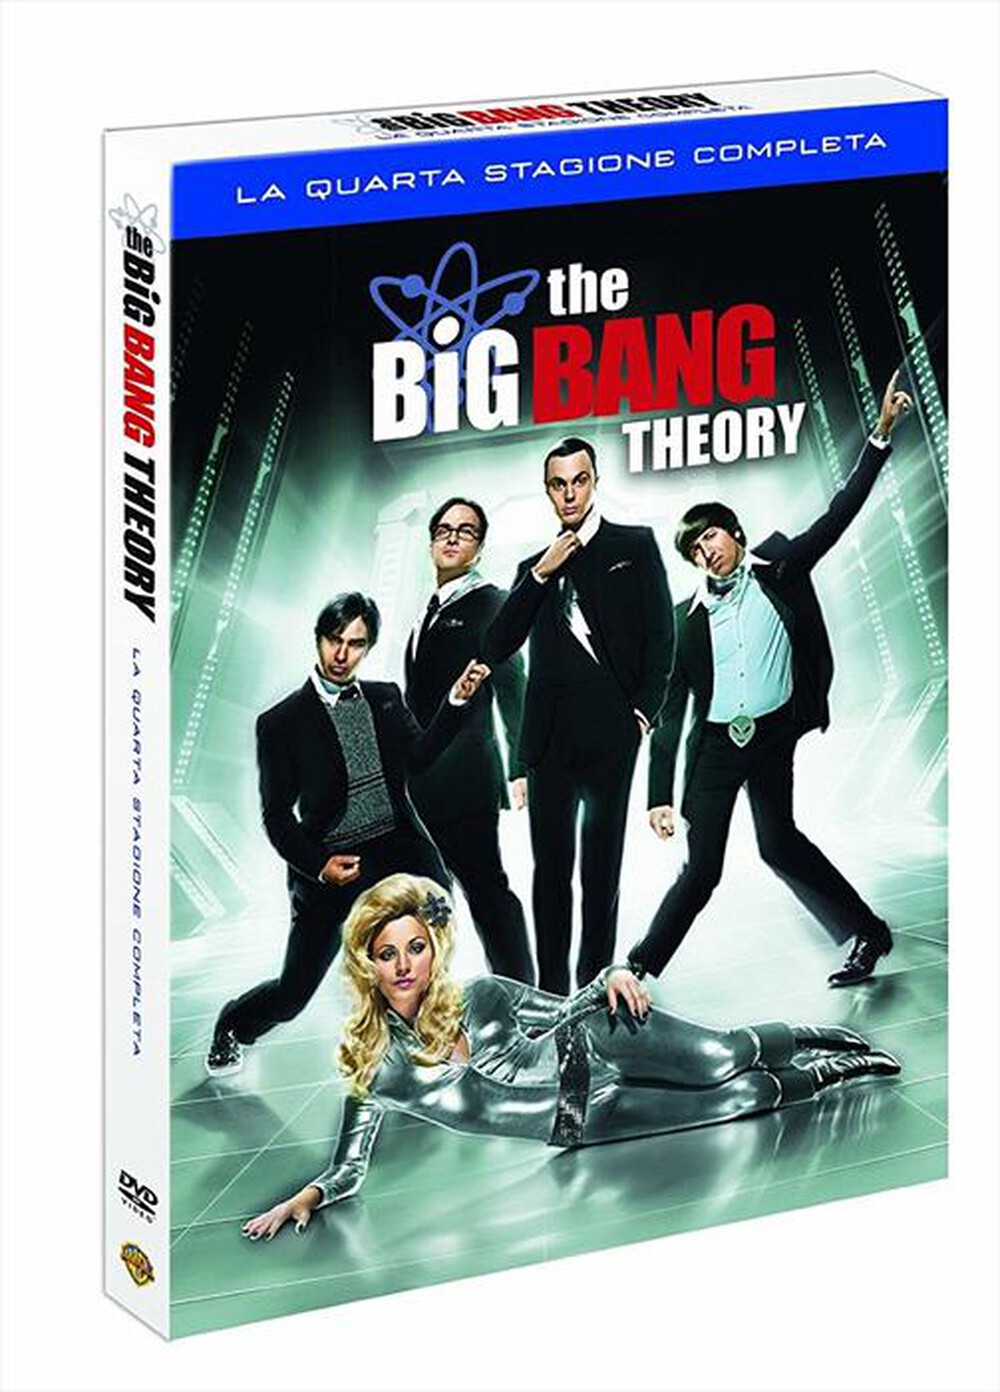 "WARNER HOME VIDEO - Big Bang Theory (The) - Stagione 04 (3 Dvd)"